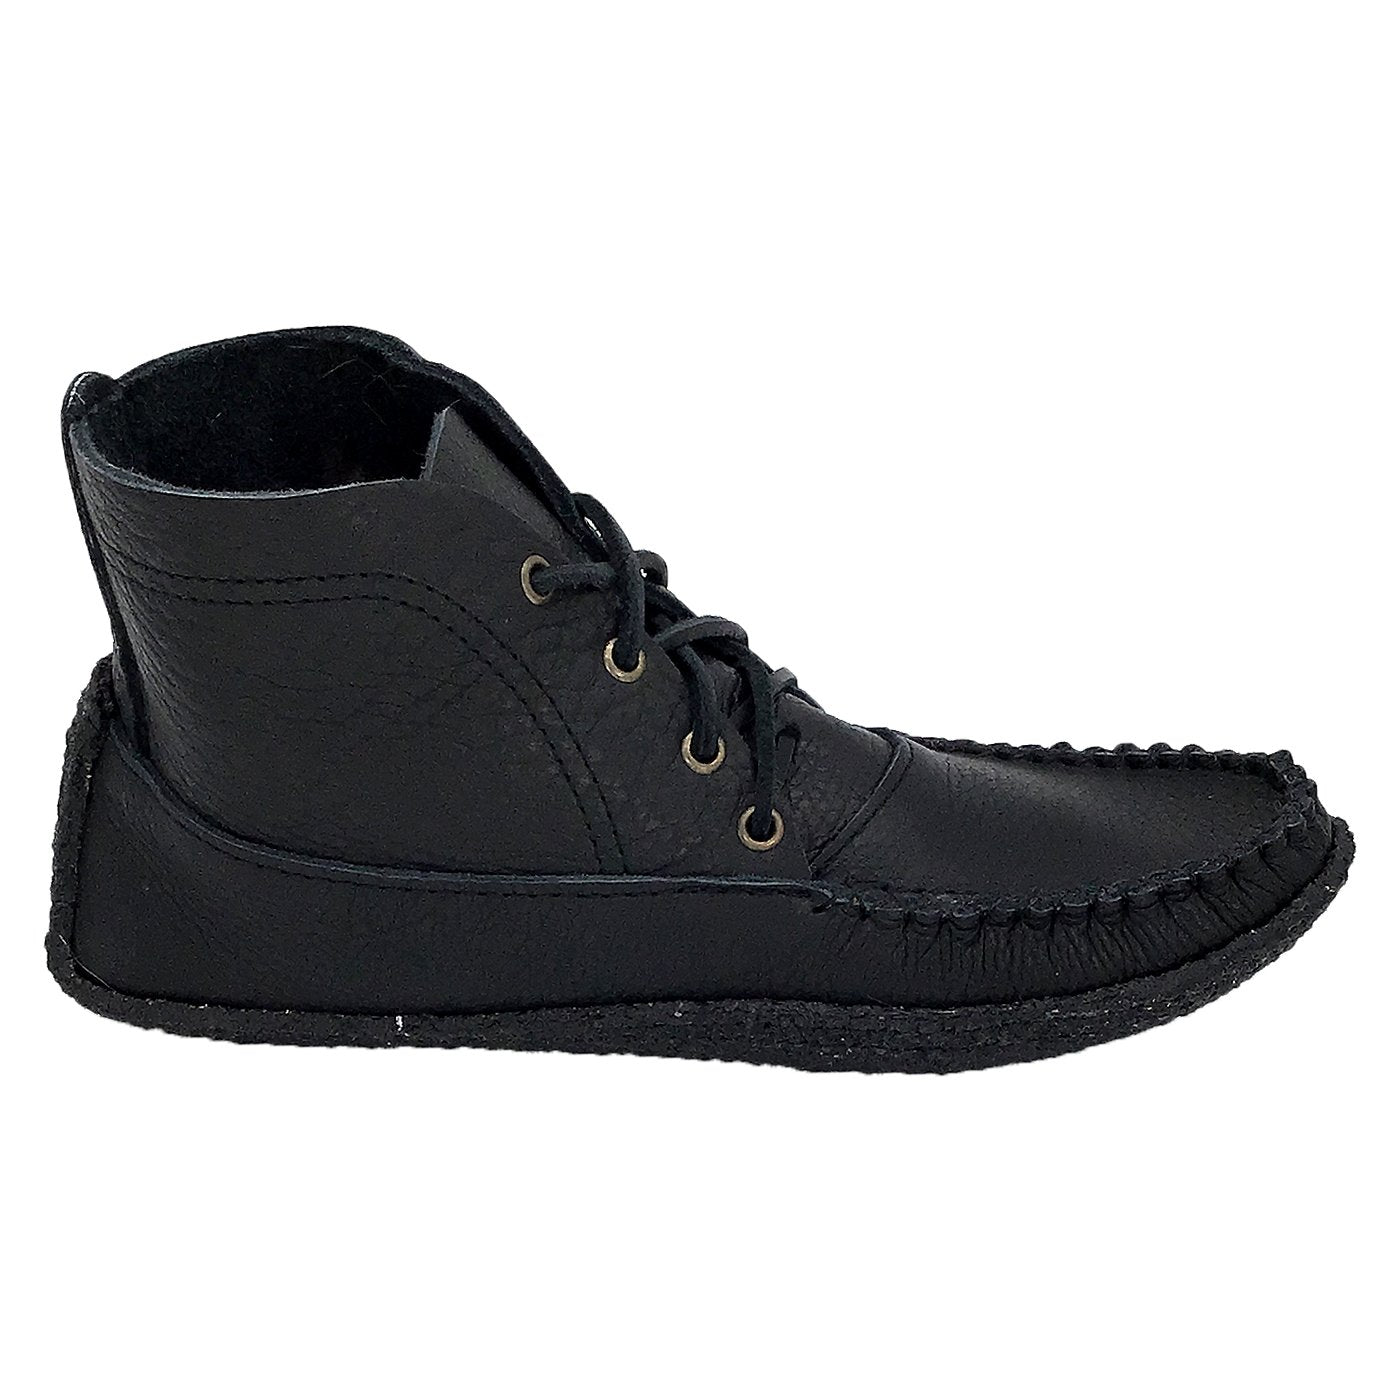 Men's Ankle Moccasin Boots